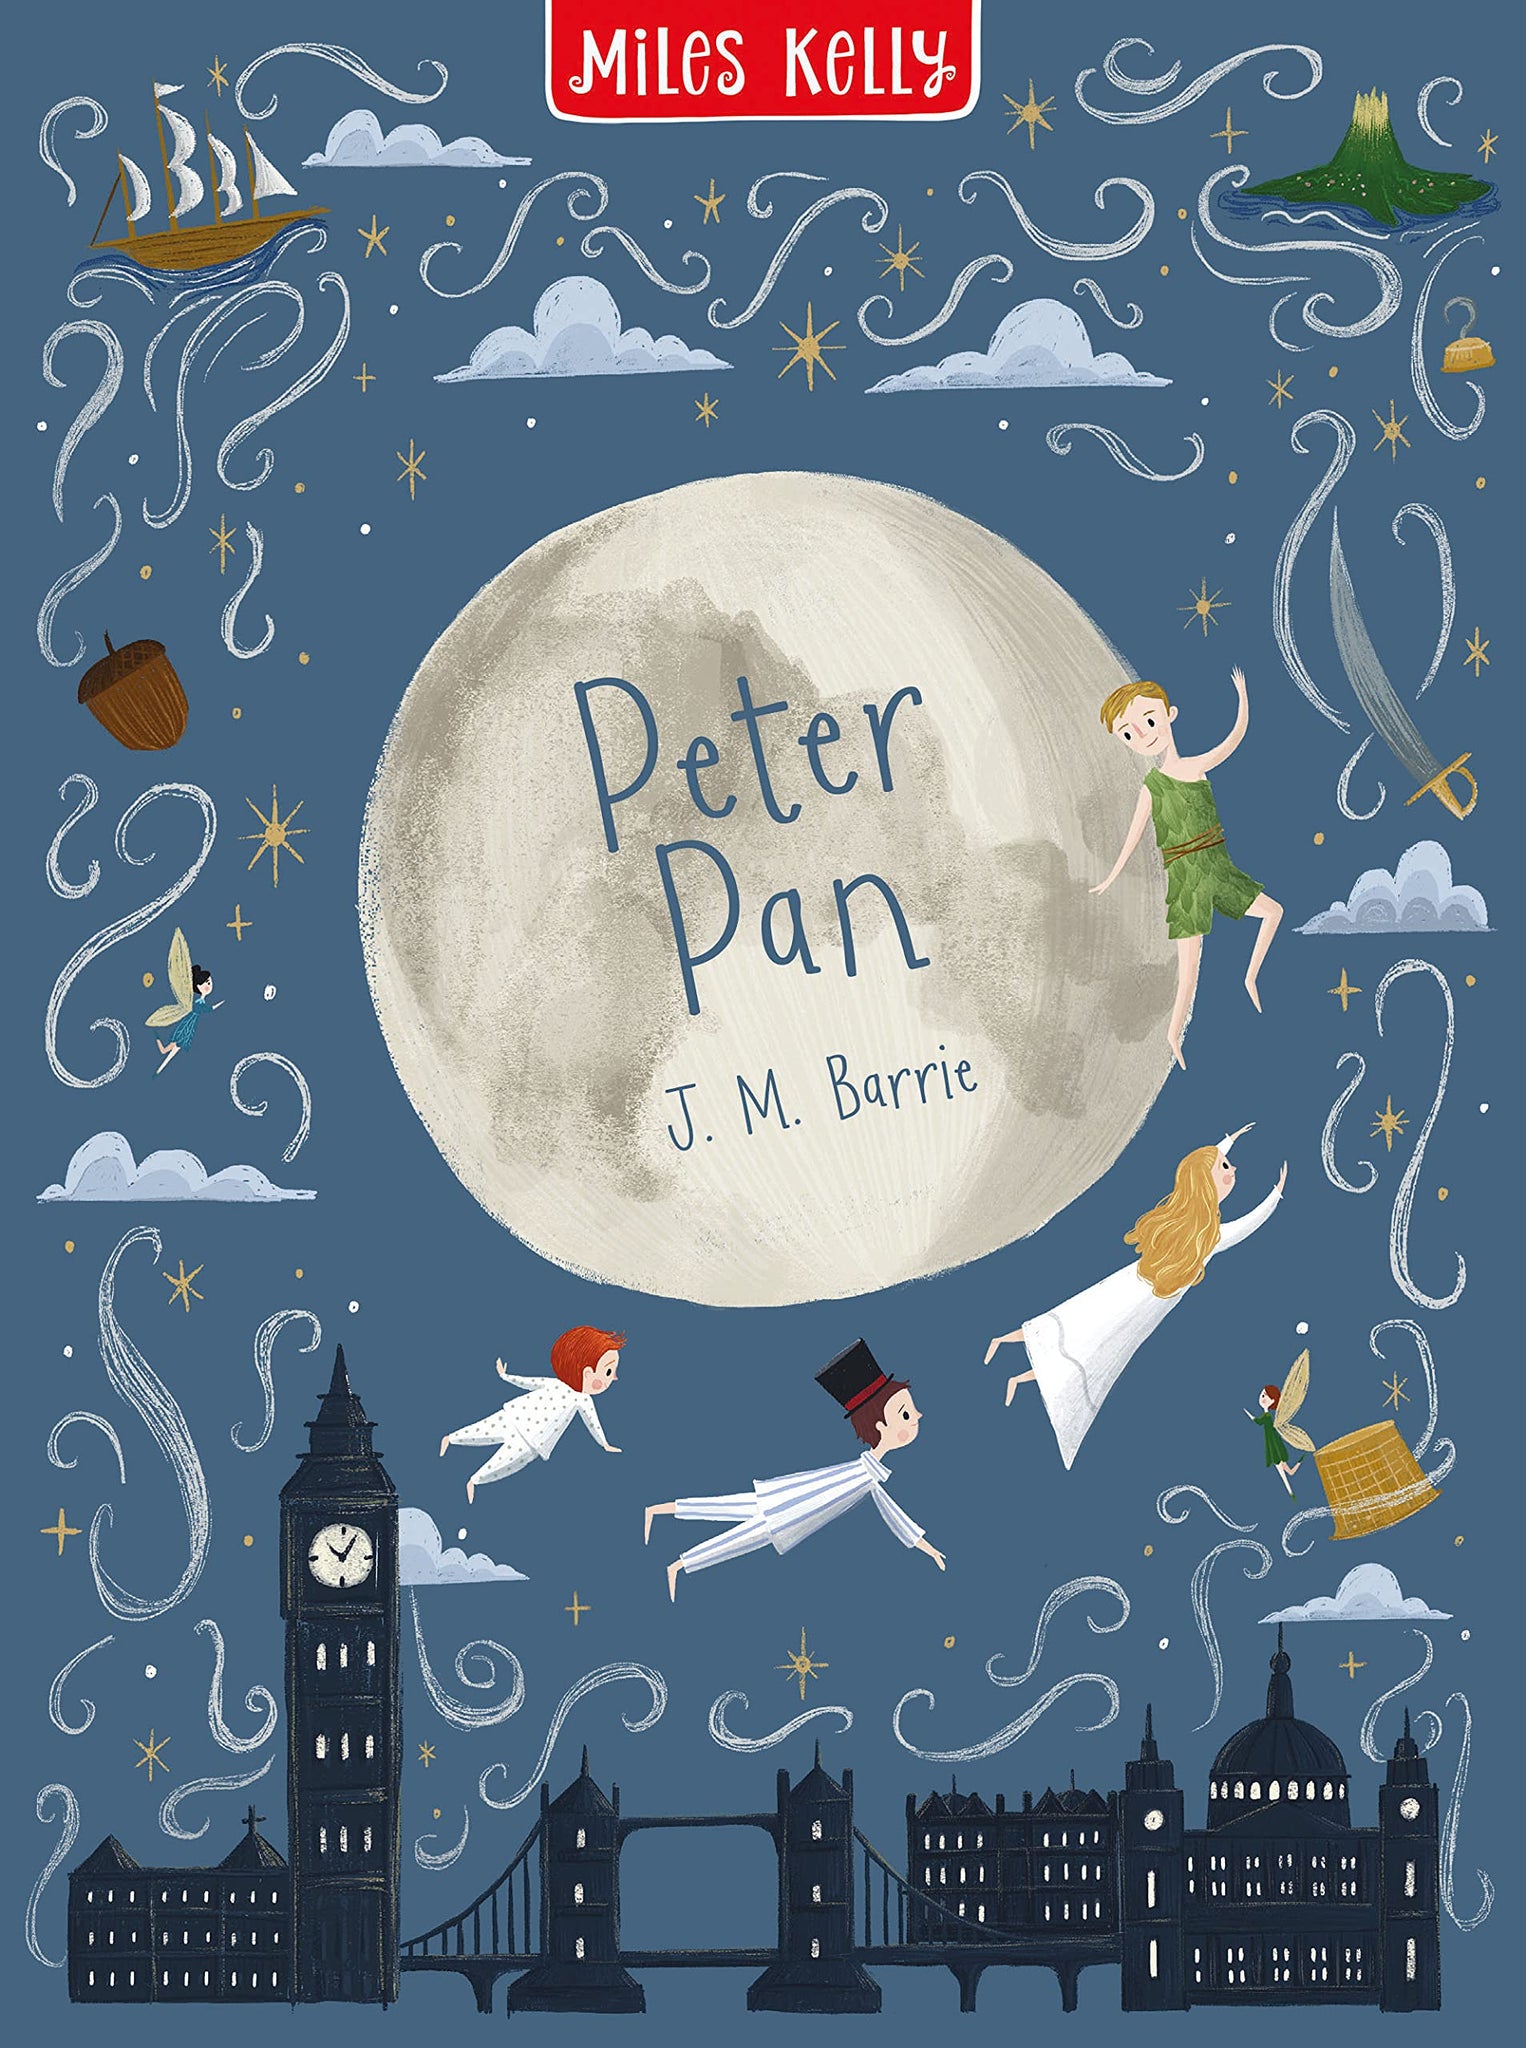 Peter Pan Hardcover Book with illustrations